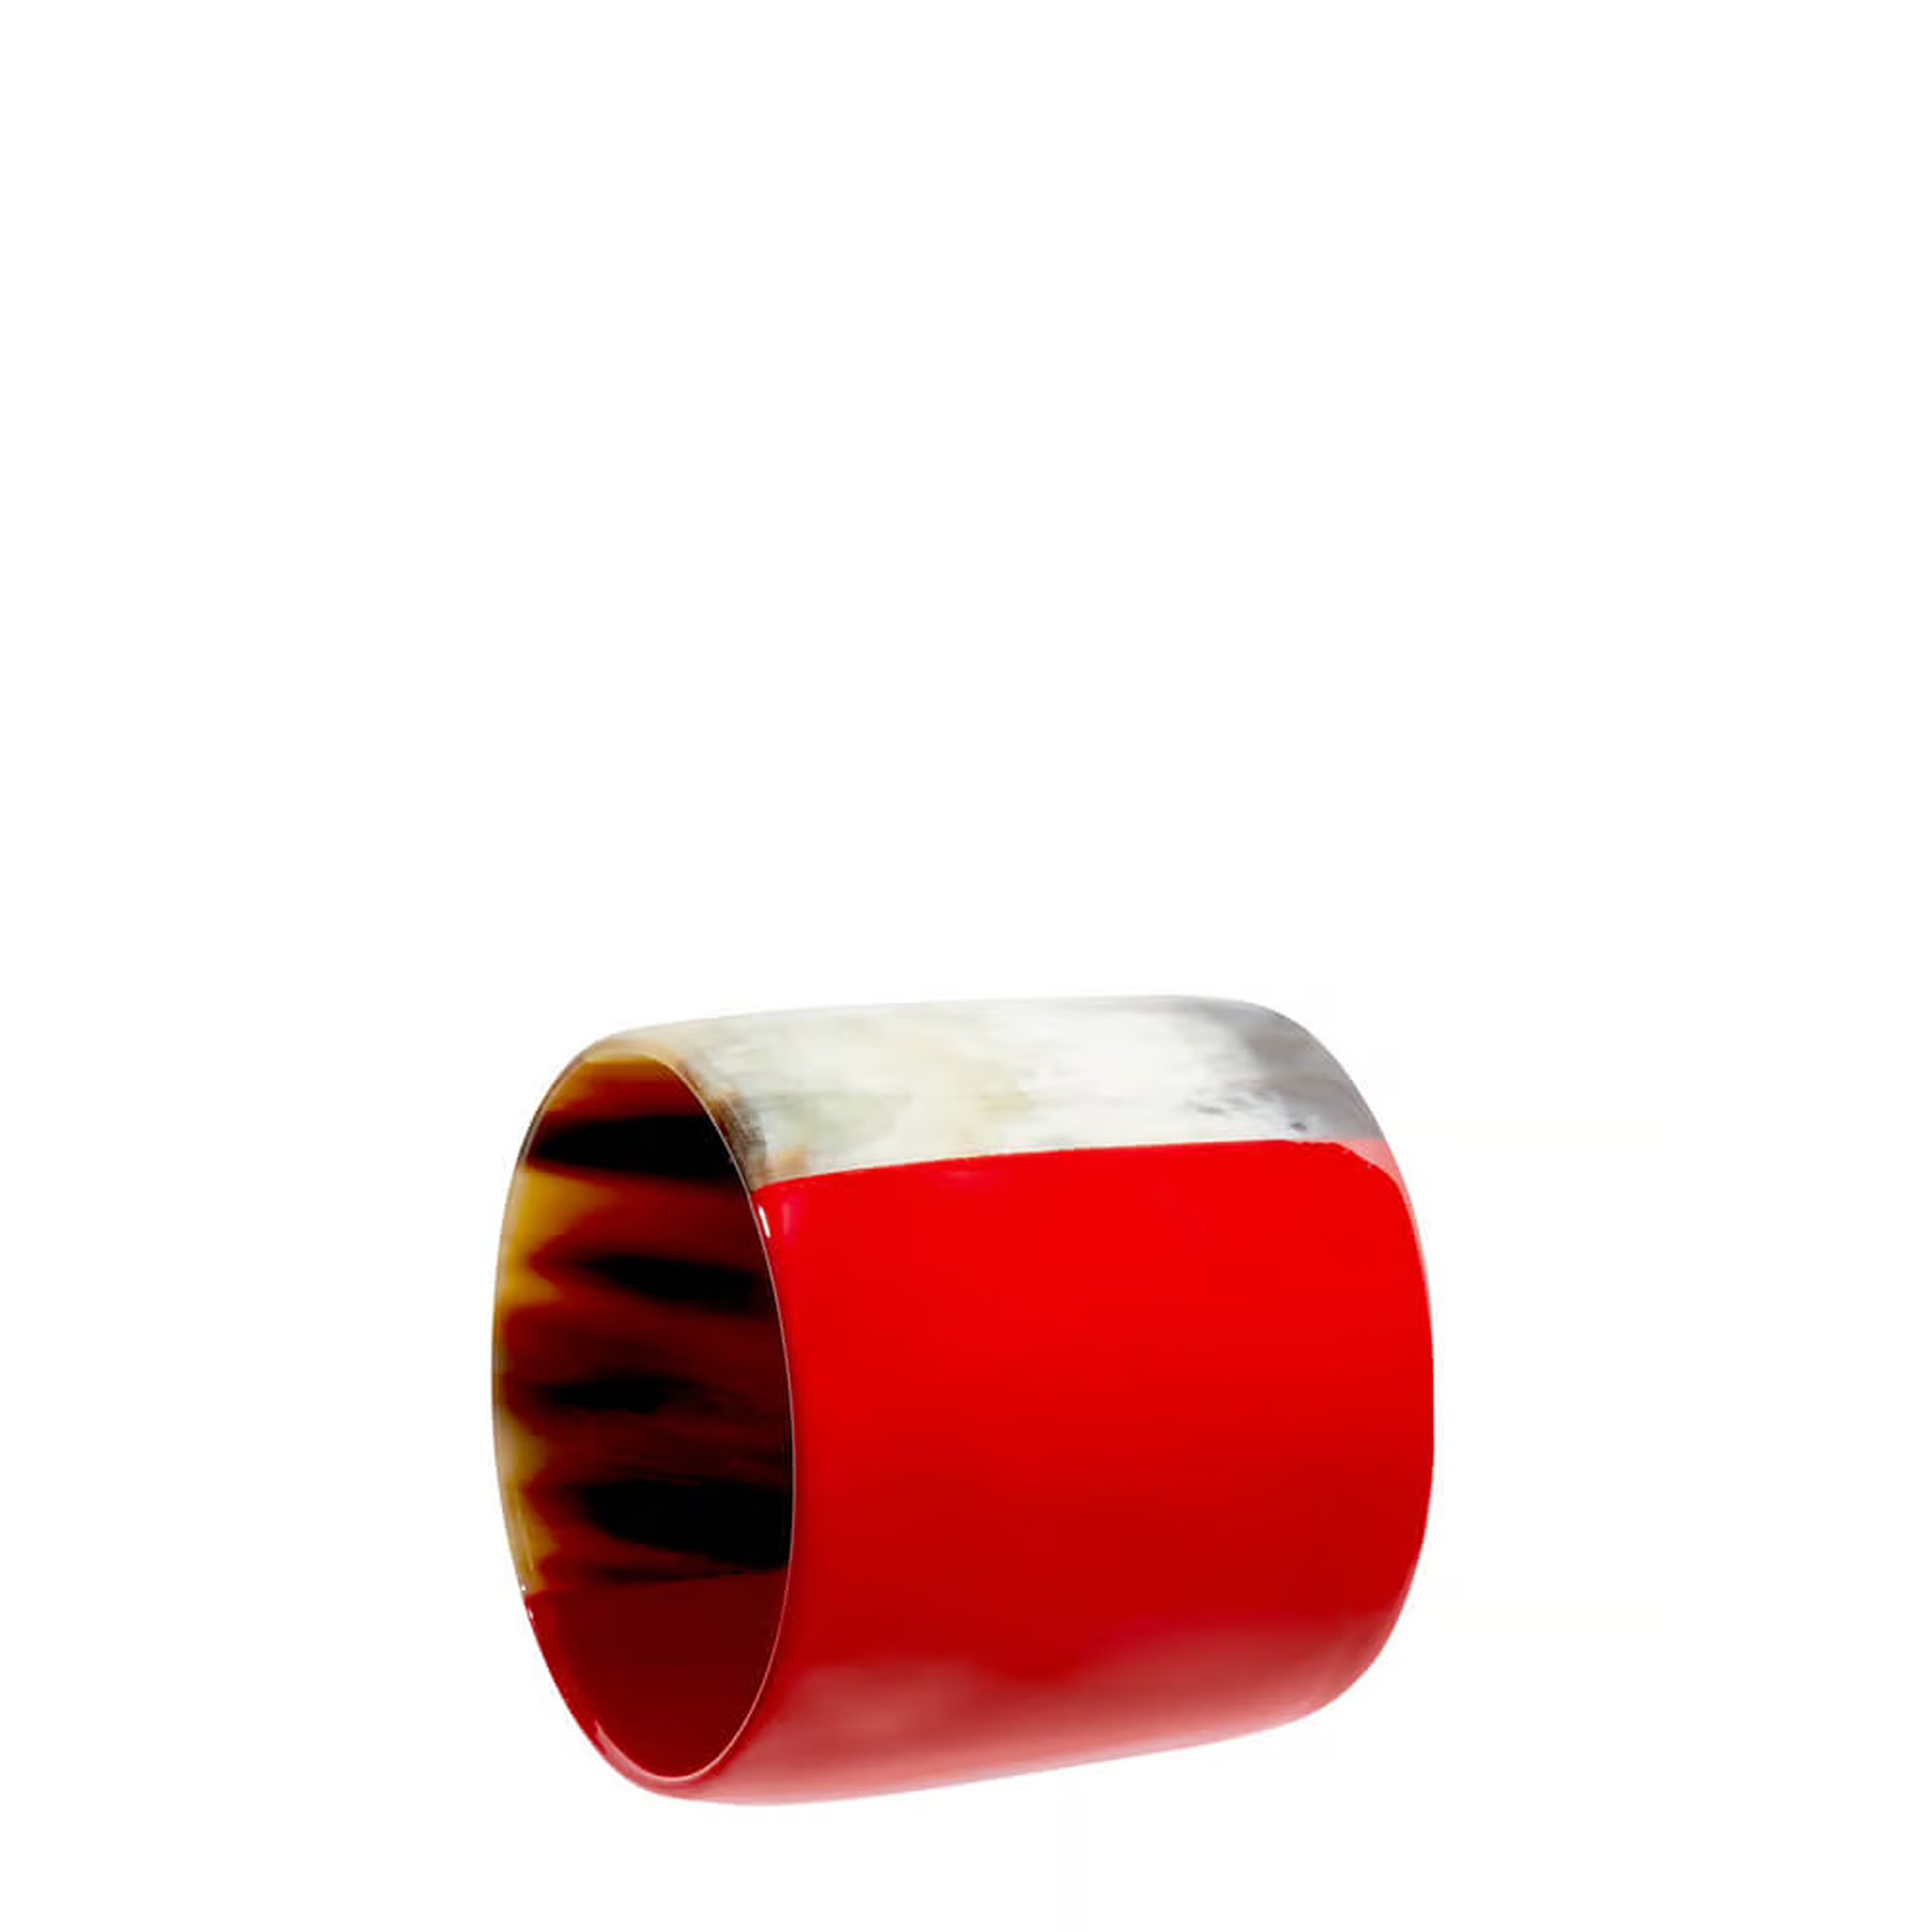 Horn + Lacquer Napkin Ring - Red